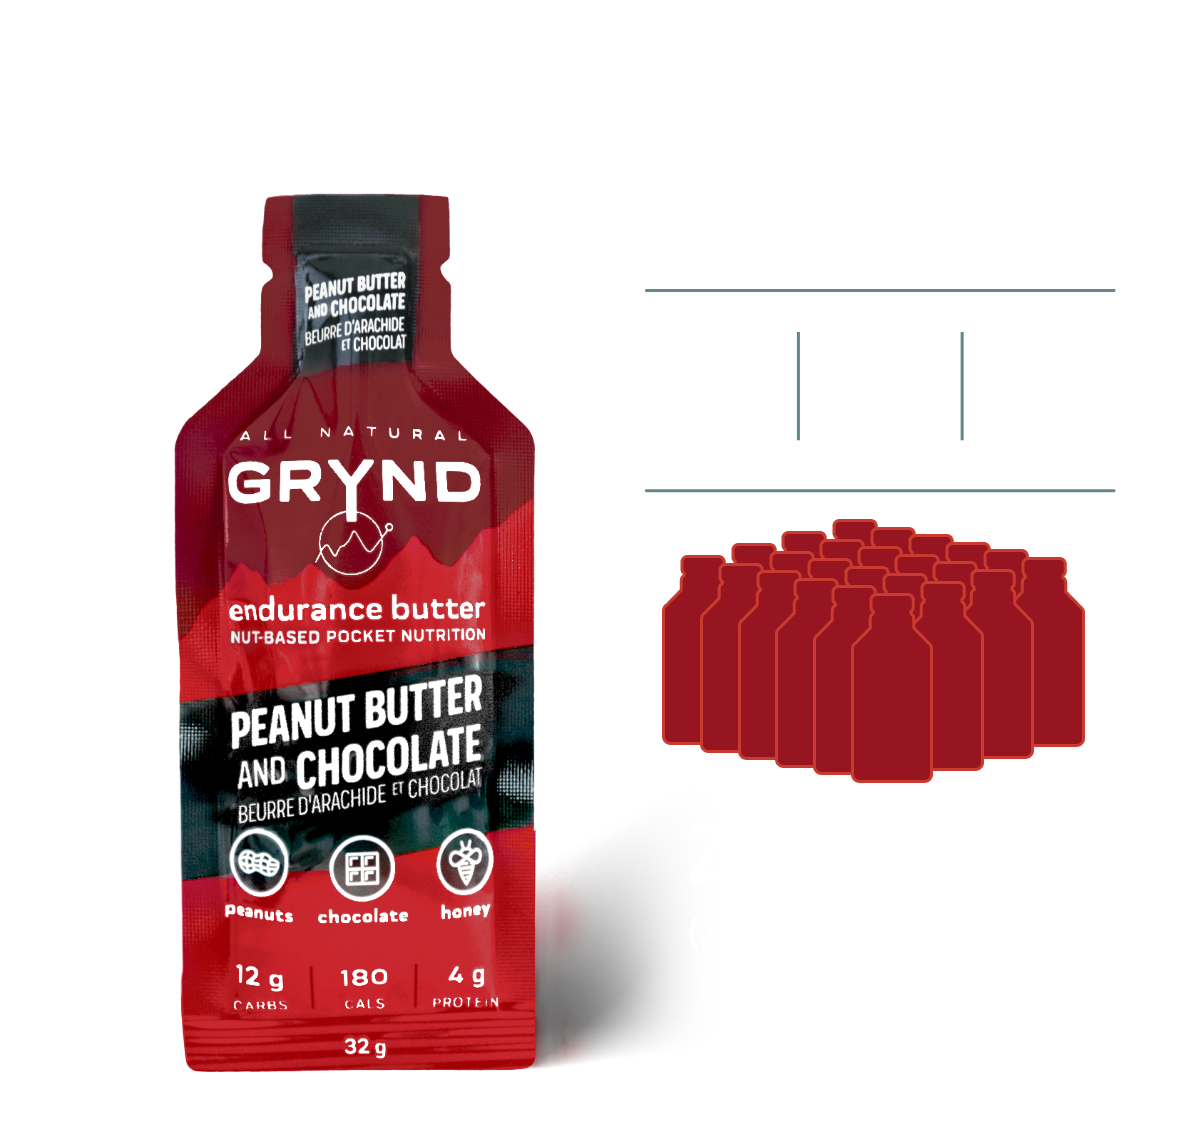 Peanut Butter & Chocolate - Snack Size (24 pack)